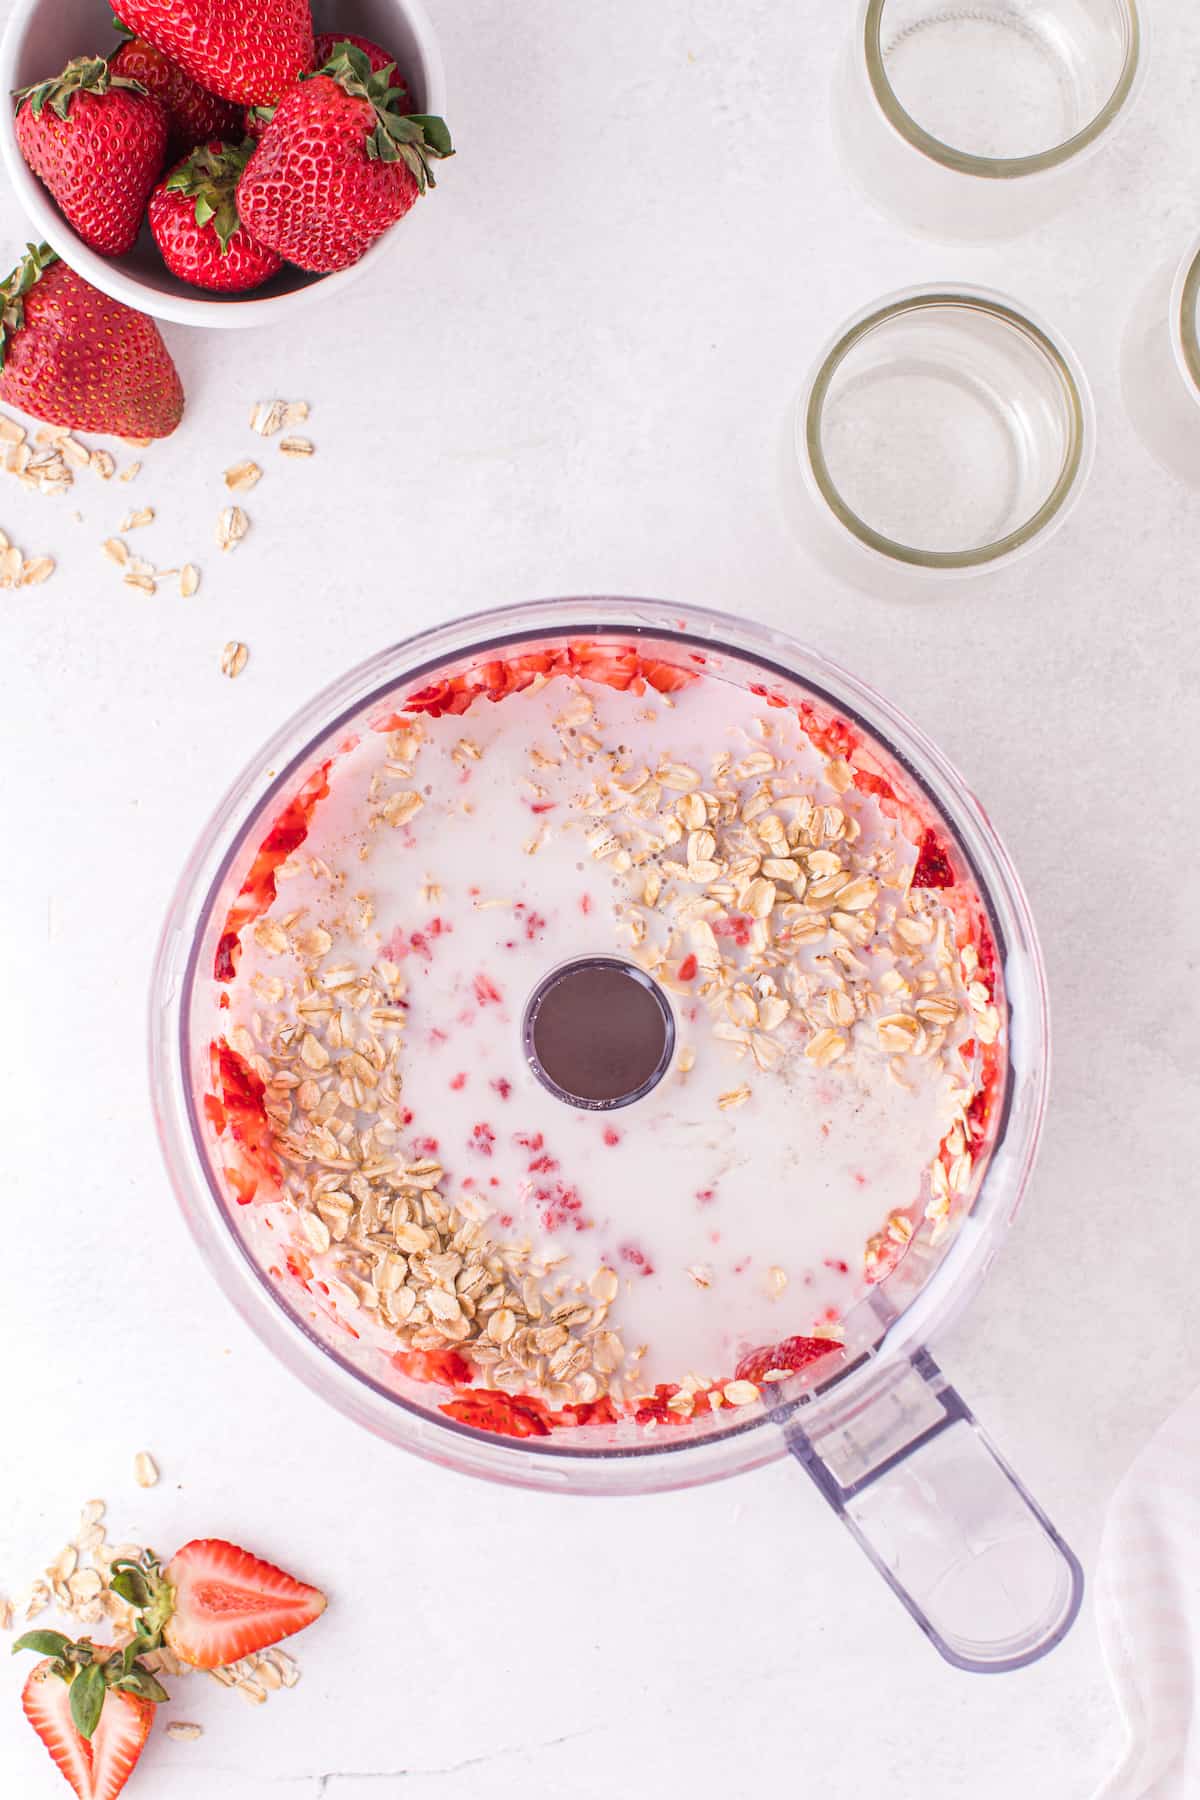 milk, oats, and pureed strawberries in a food processor